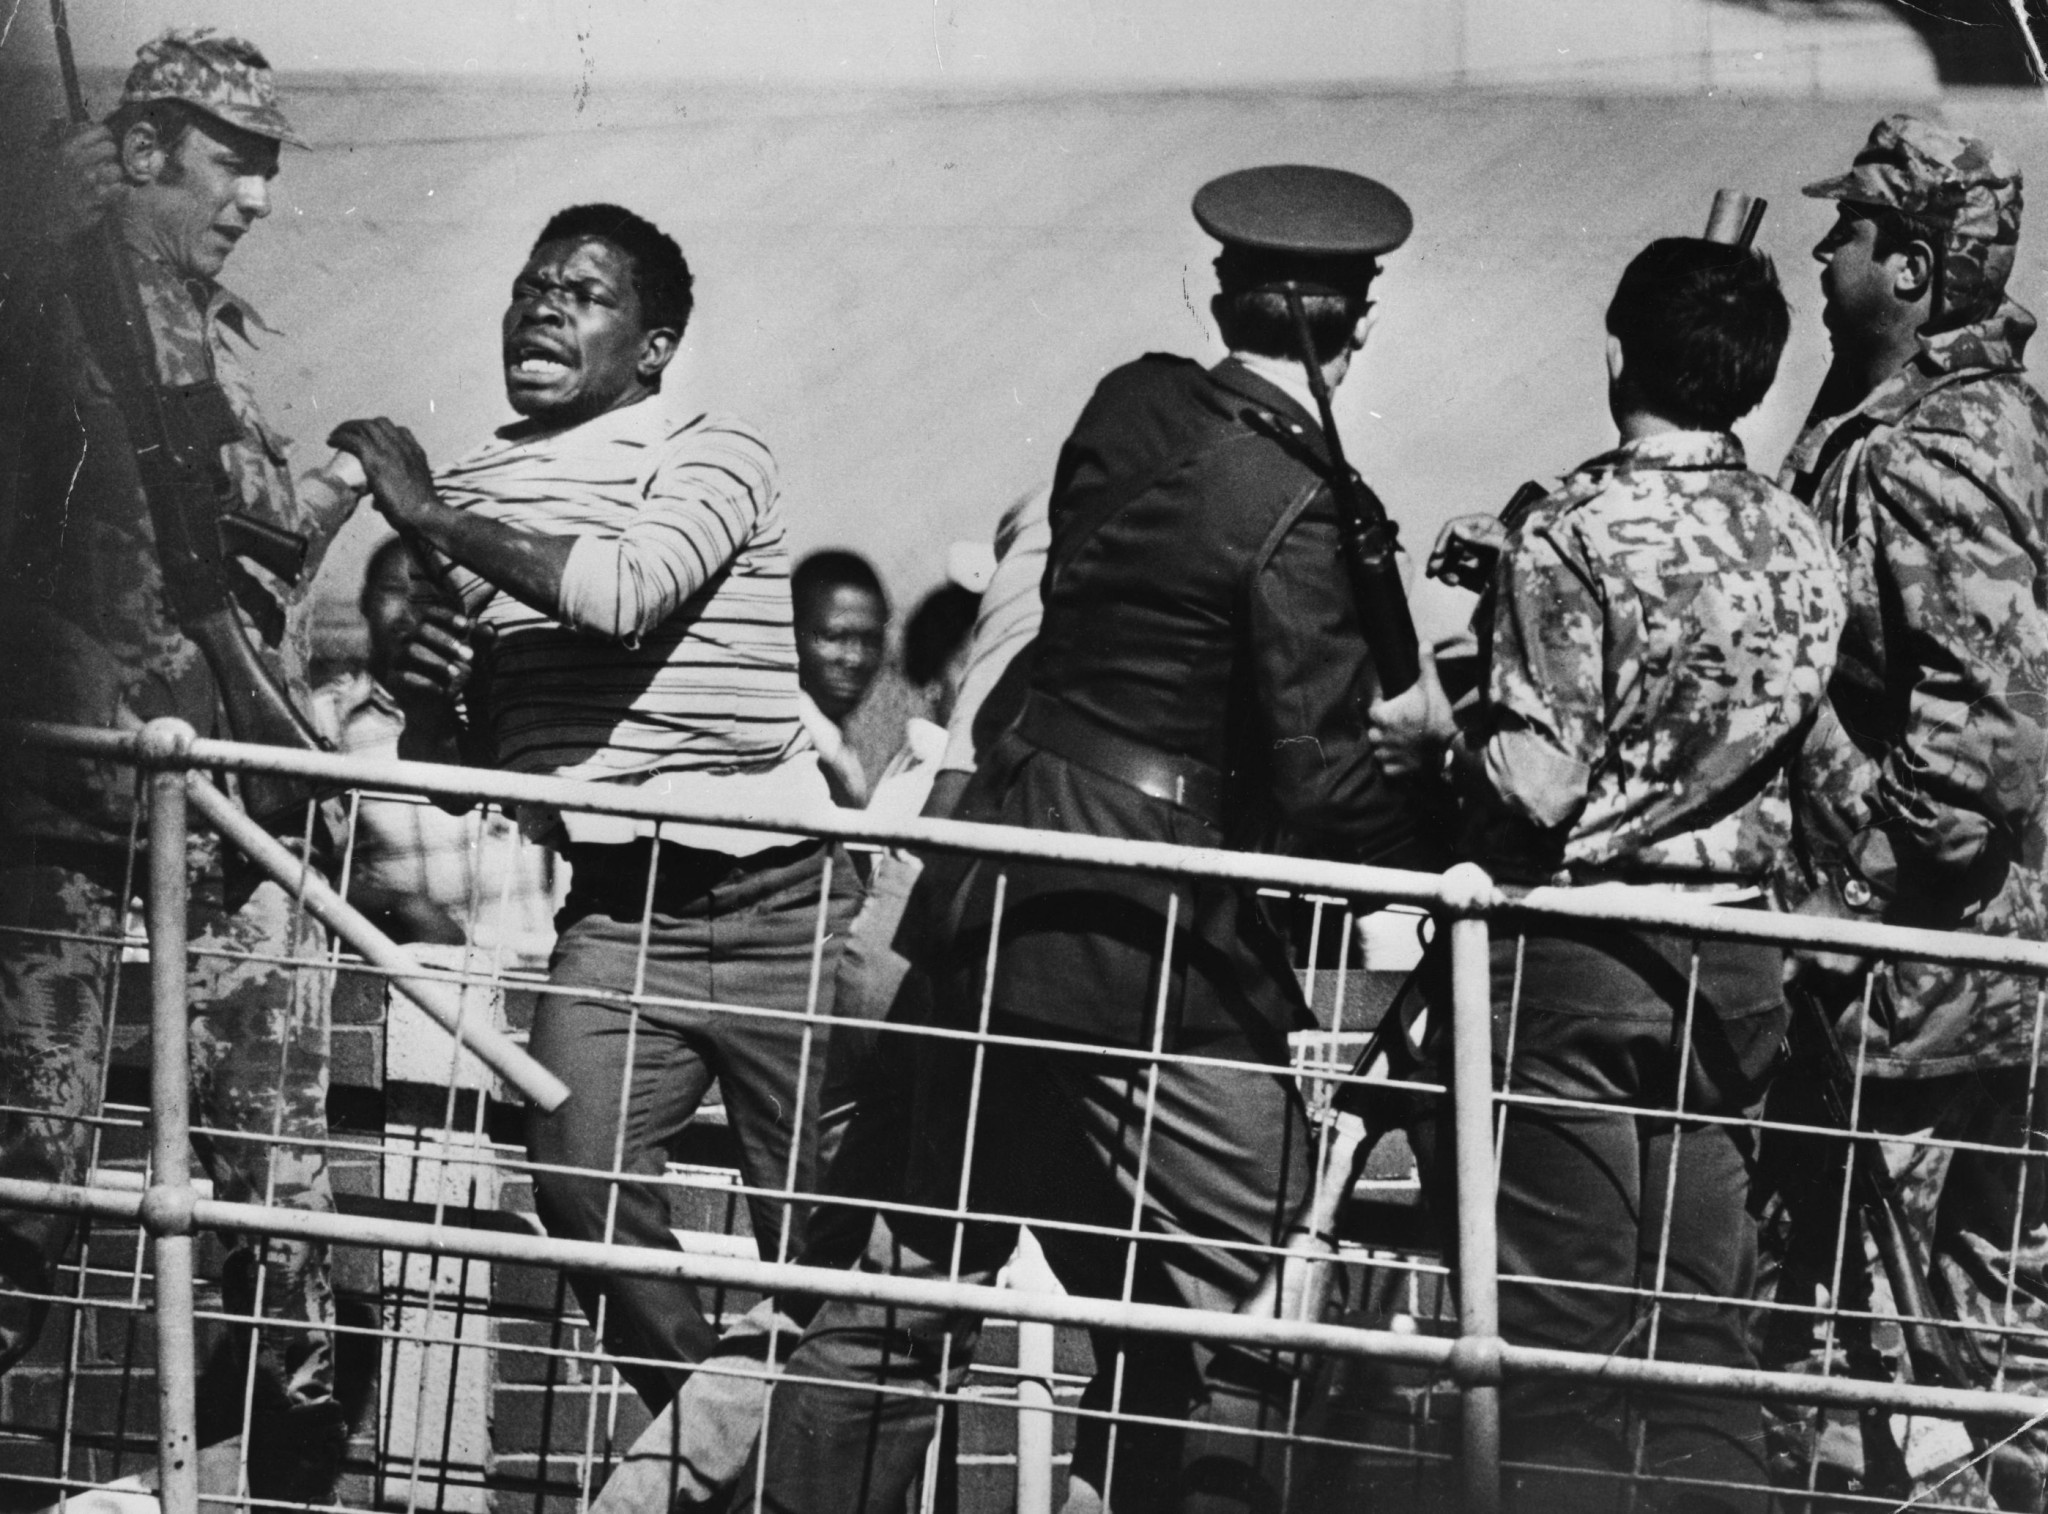 In June 1976, at least 160 people died after South African police opened fire on protesters in Soweto ©Getty Images 